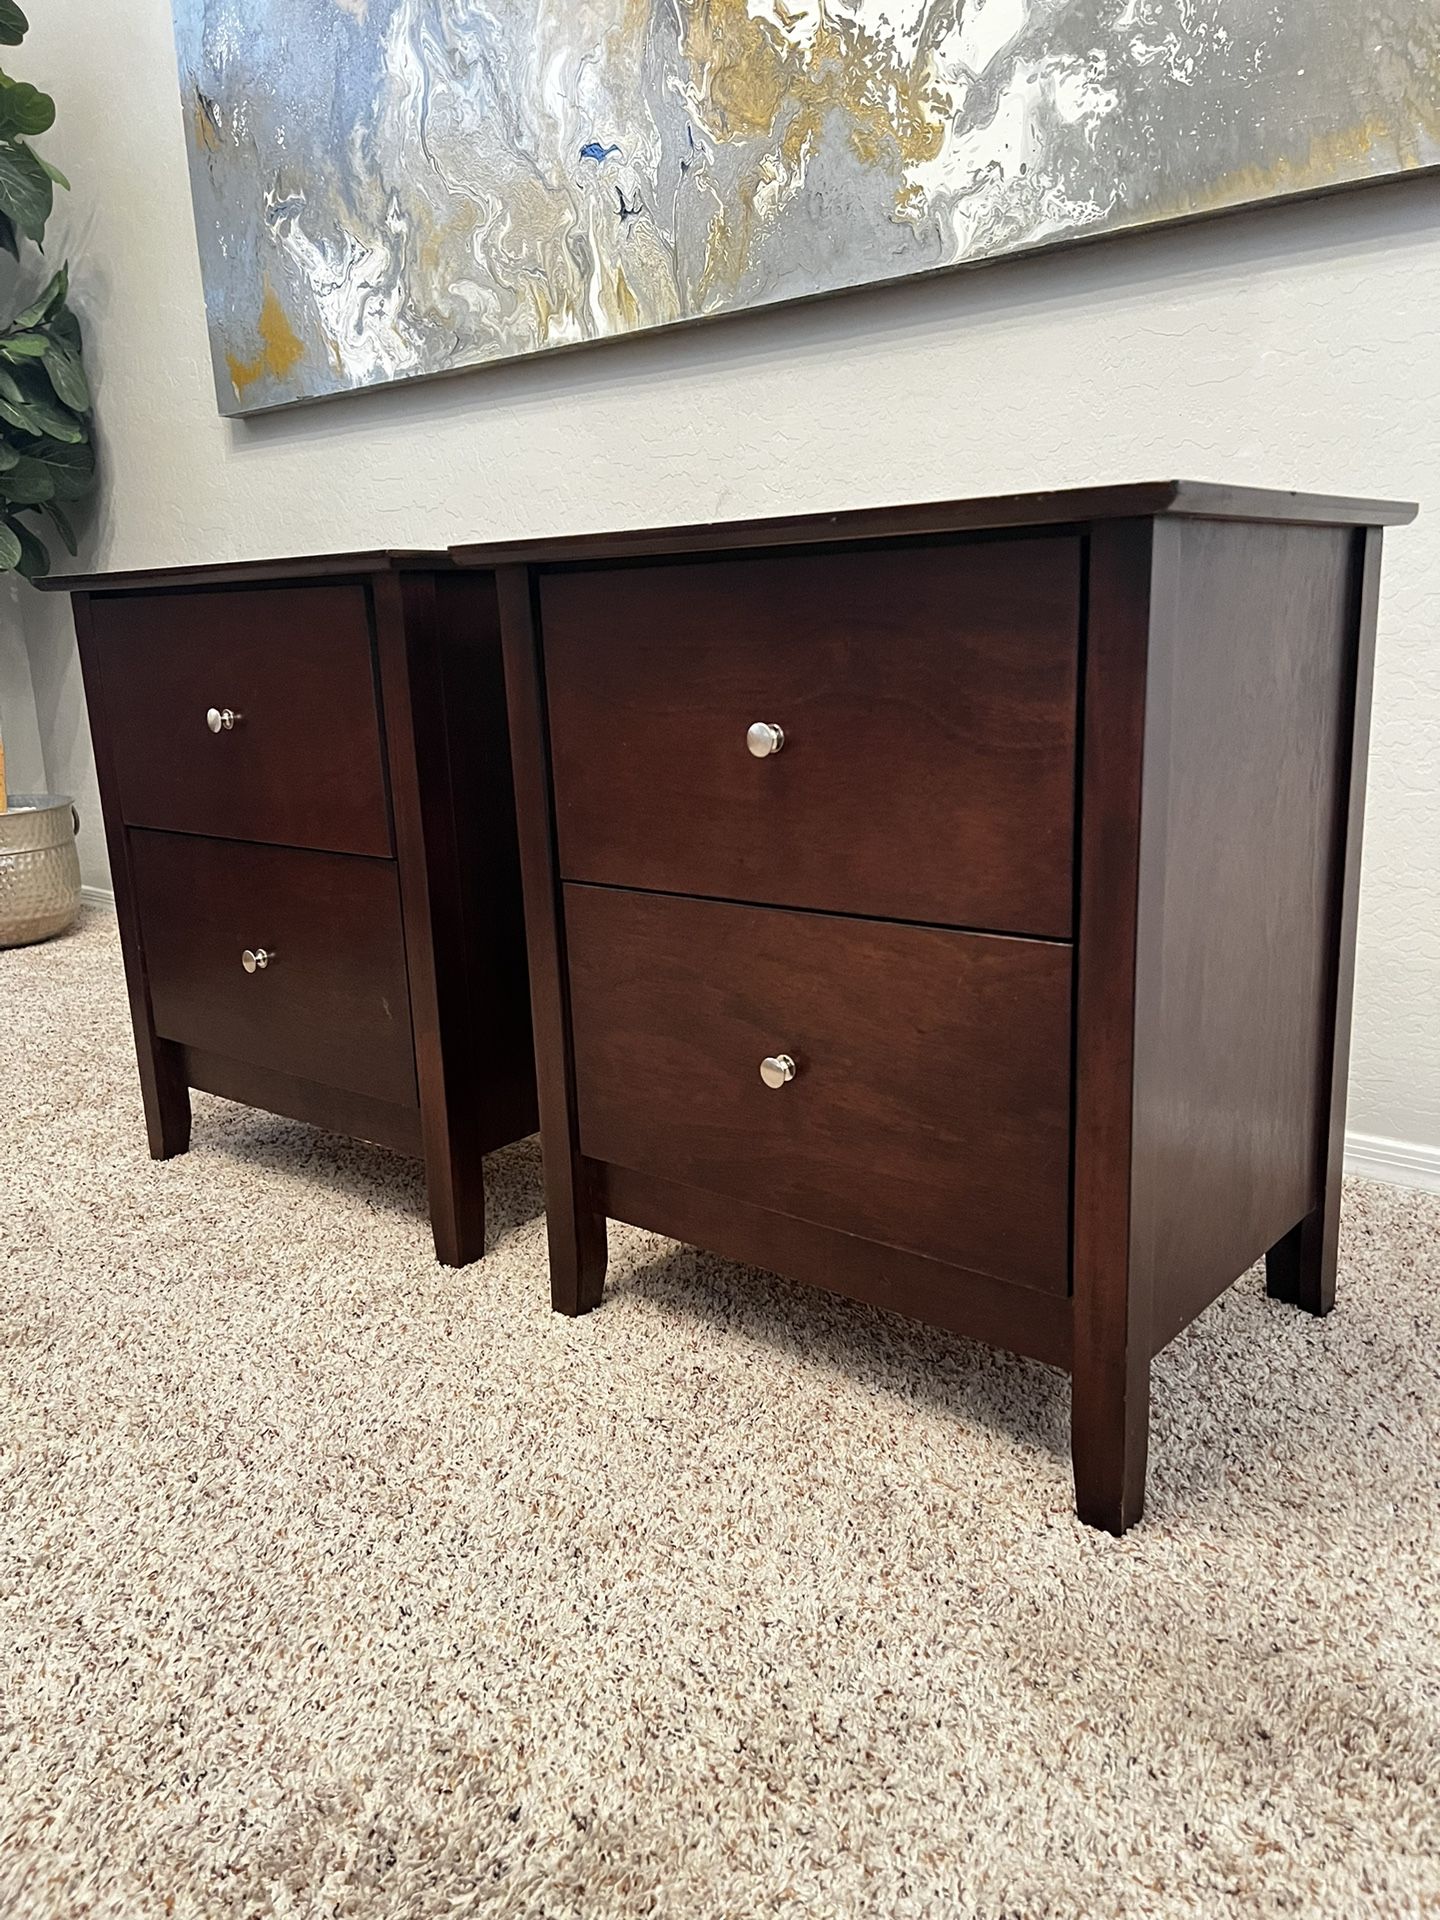 26” Tall Pair Of Two Solid Wood Brown Mahogany Nightstands Set- Dovetail Drawers And Silver Knobs